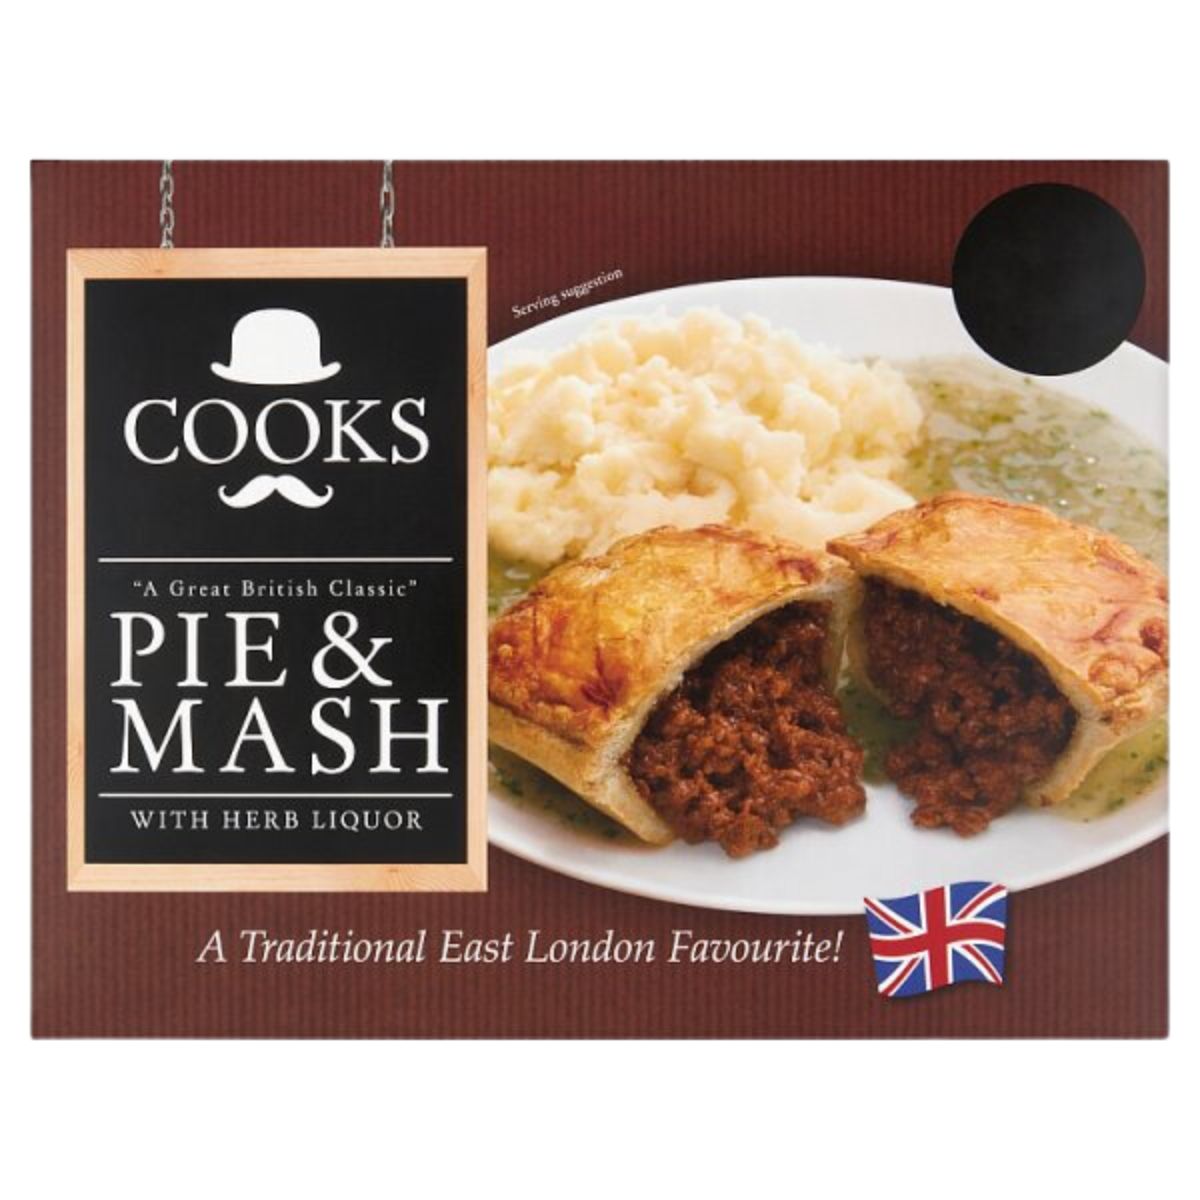 Cooks - Pie & Mash - 450g traditional east london.